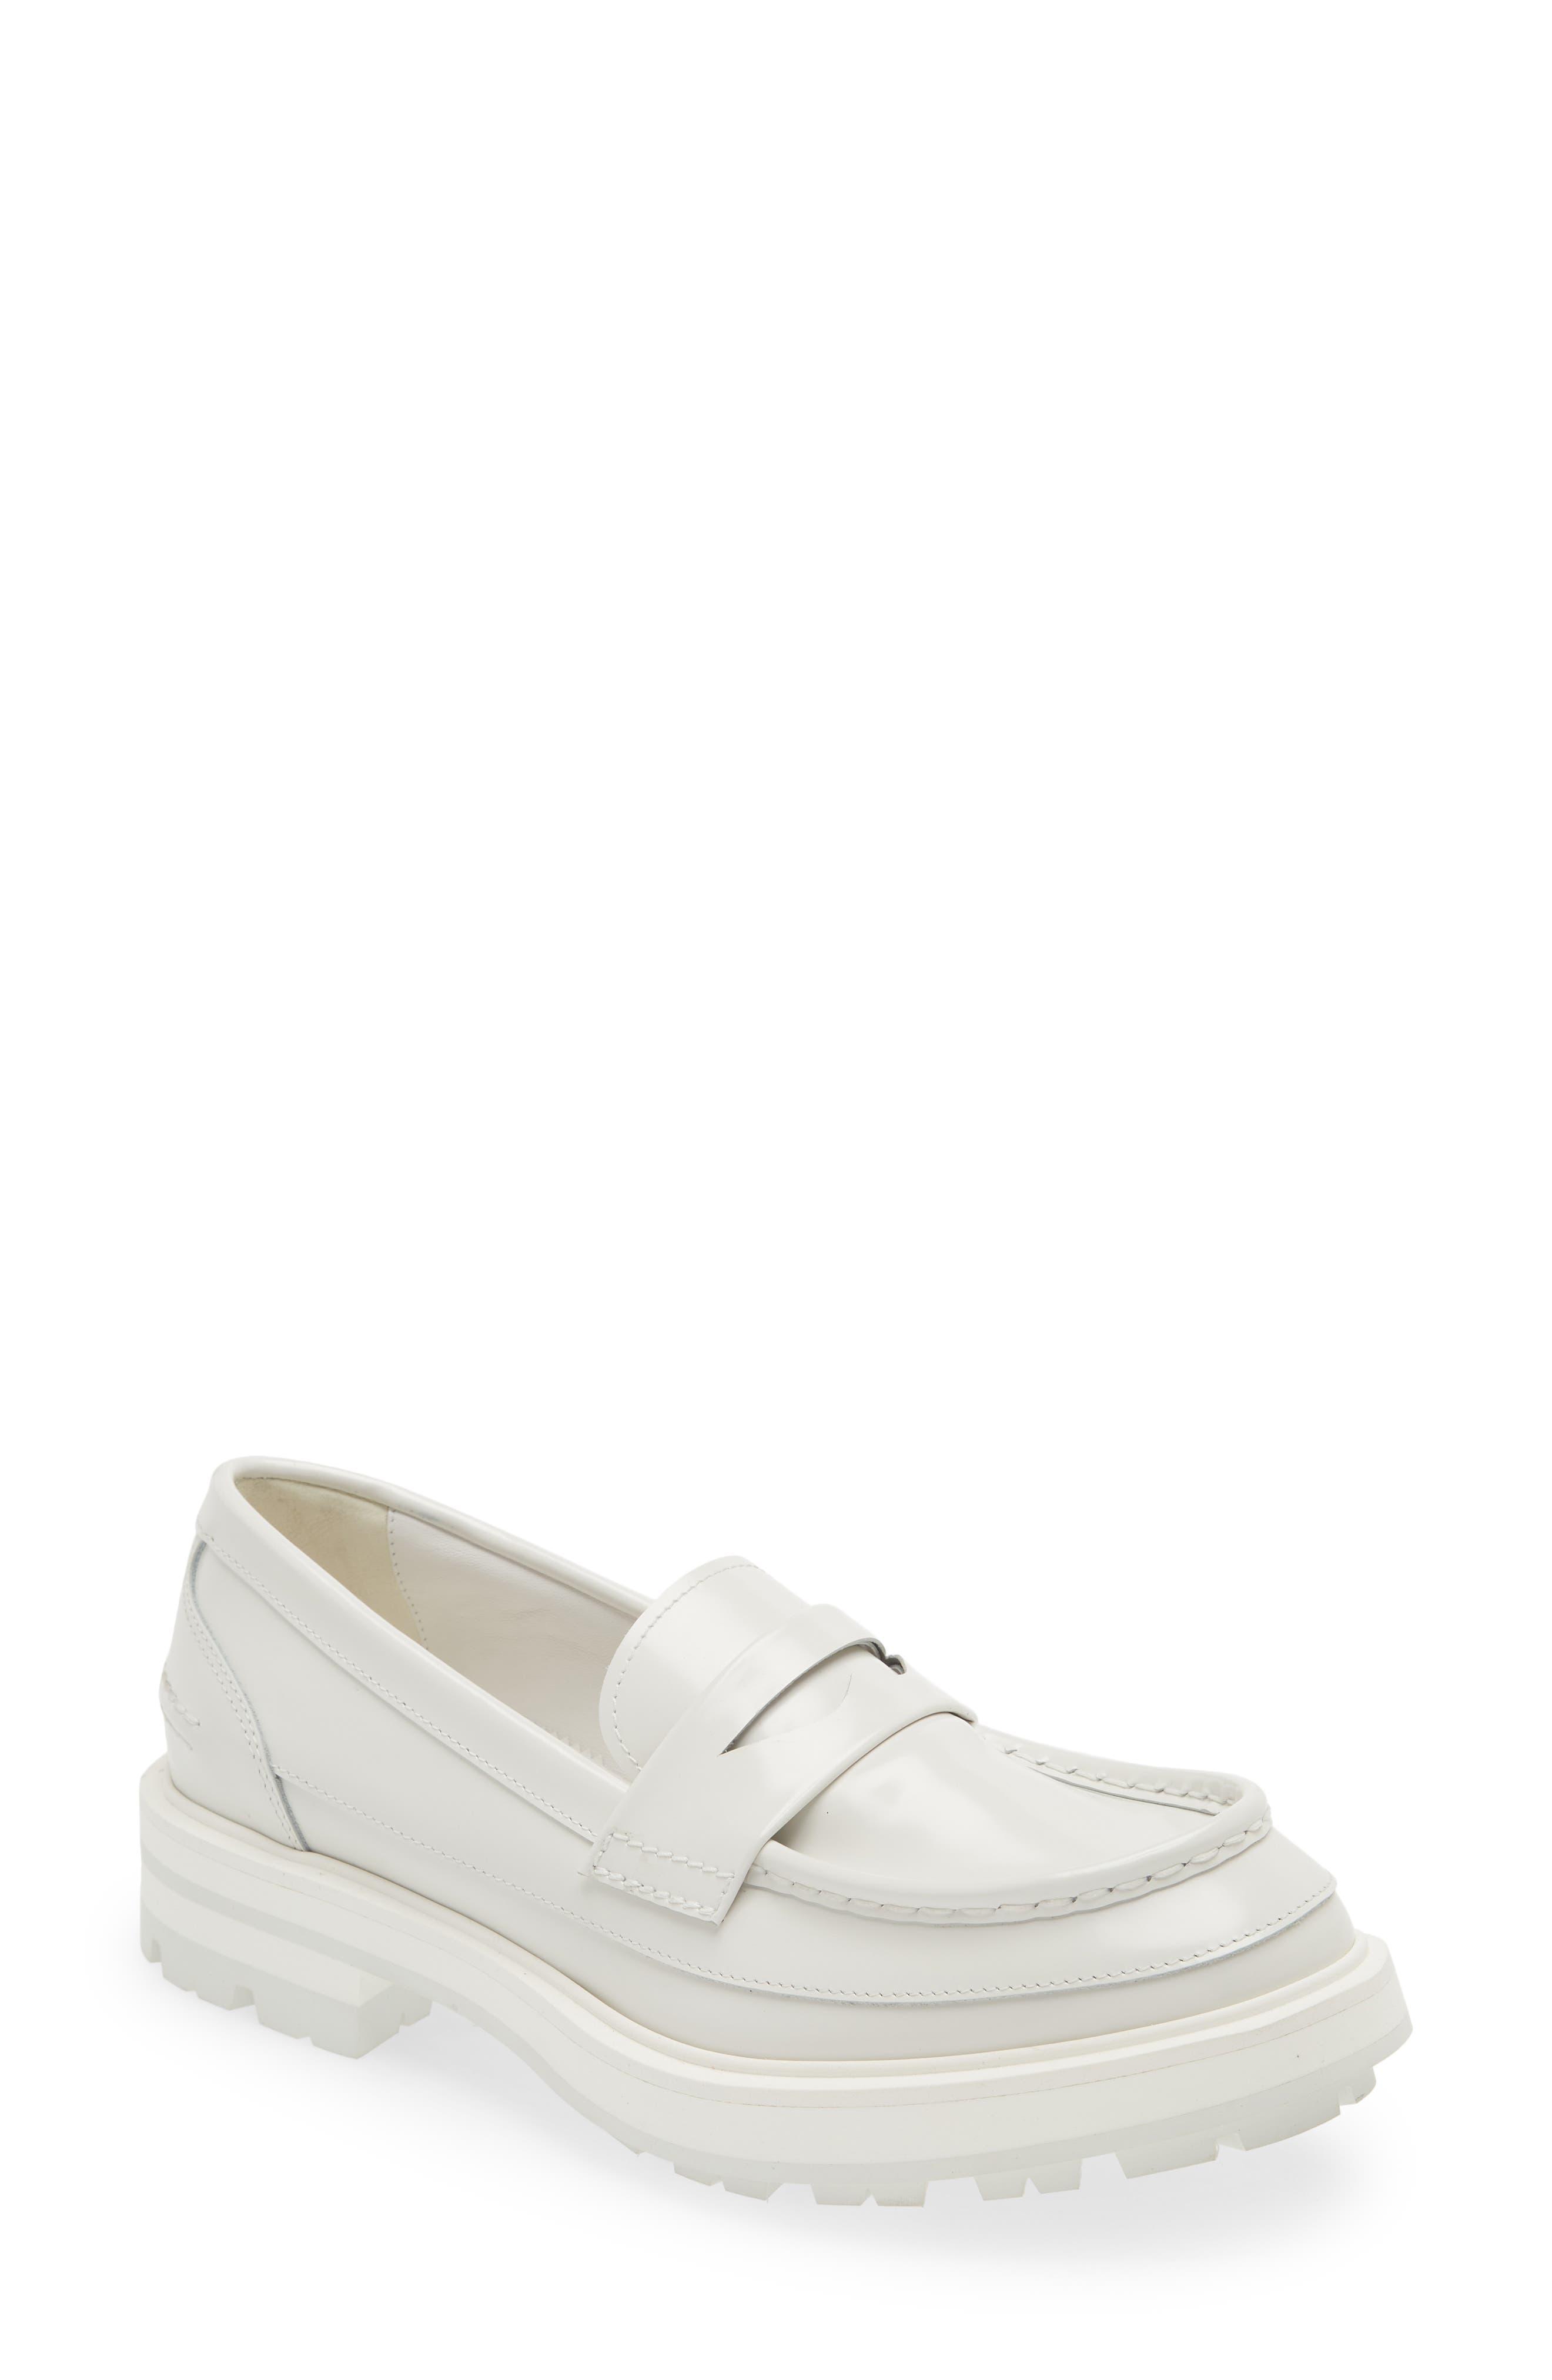 Alexander McQueen The Seam Lug Sole Penny Loafer in White for Men | Lyst